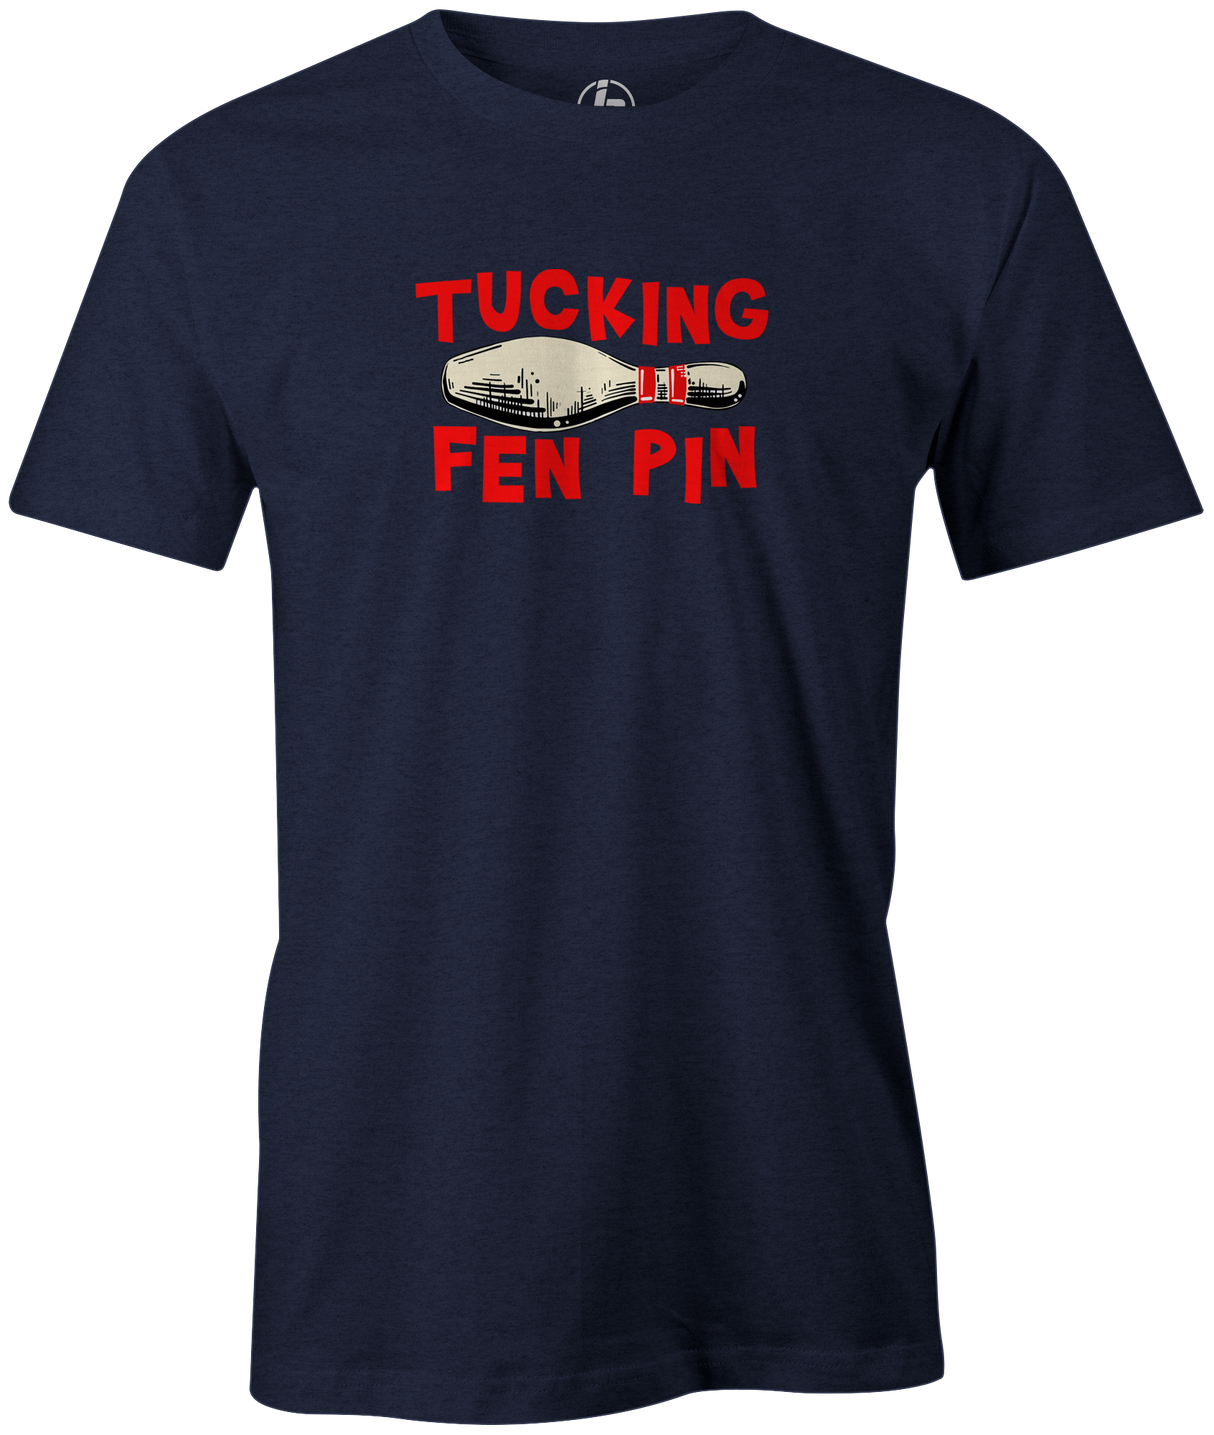 Right-handers know it well and hate it the most...dang Ten Pin!  Bowling tee, tee-shirt, tshirt, t-shirt. Bowling league shirt. Fucking Ten Pin. Tucking Fen Pin. Bowlers hate the ten pin. 